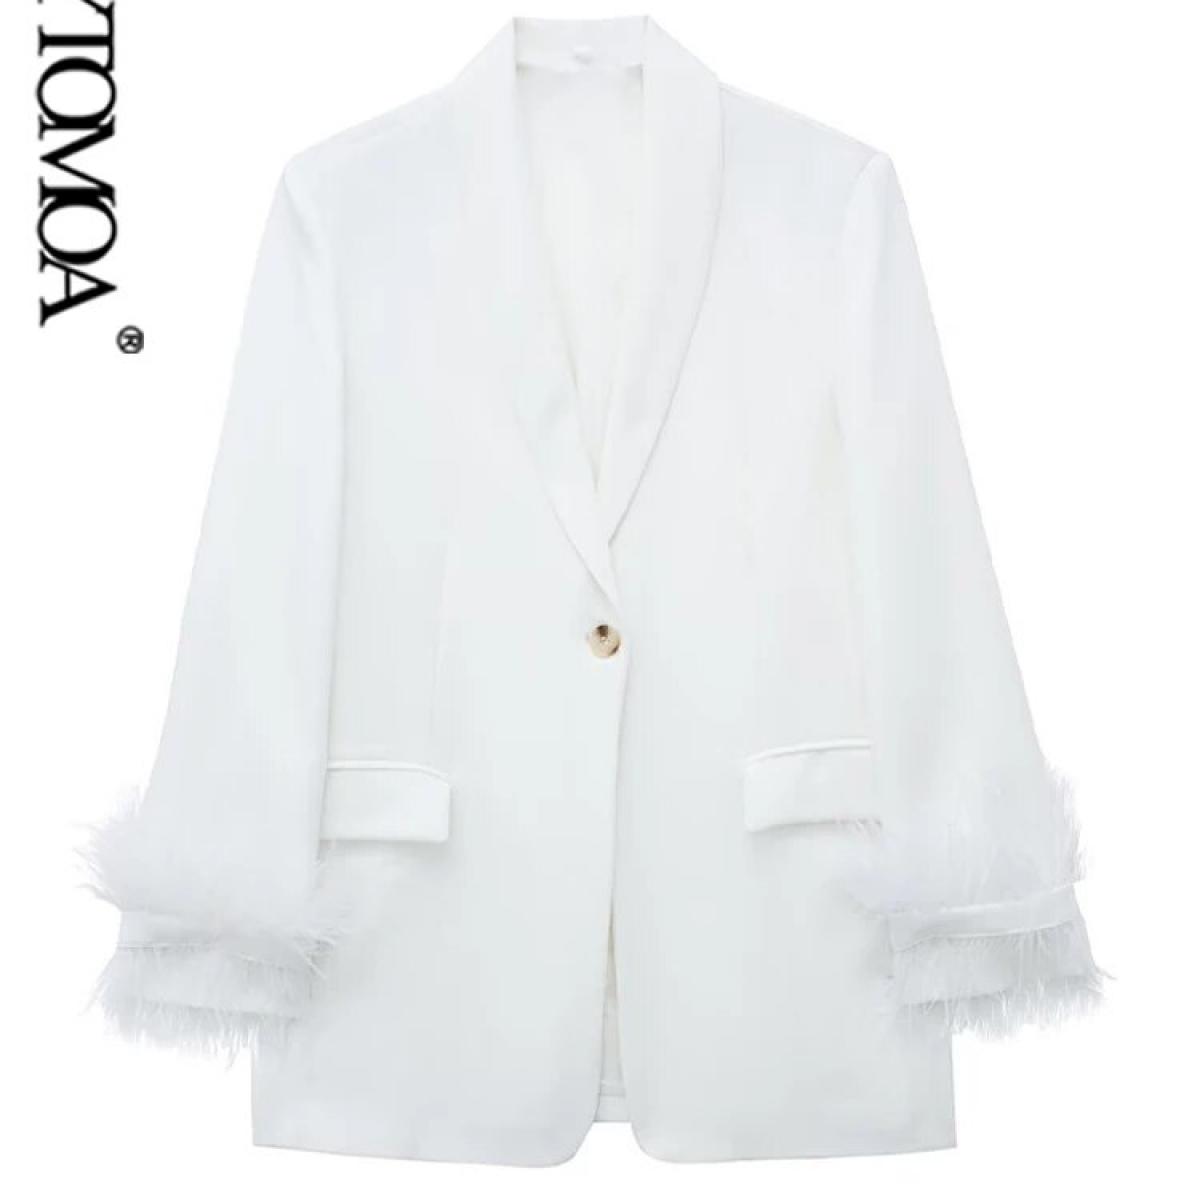 Kpytomoa Women Fashion With Feathers Front Button White Blazer Coat Vintage Long Sleeve Flap Pockets Female Outerwear Ch